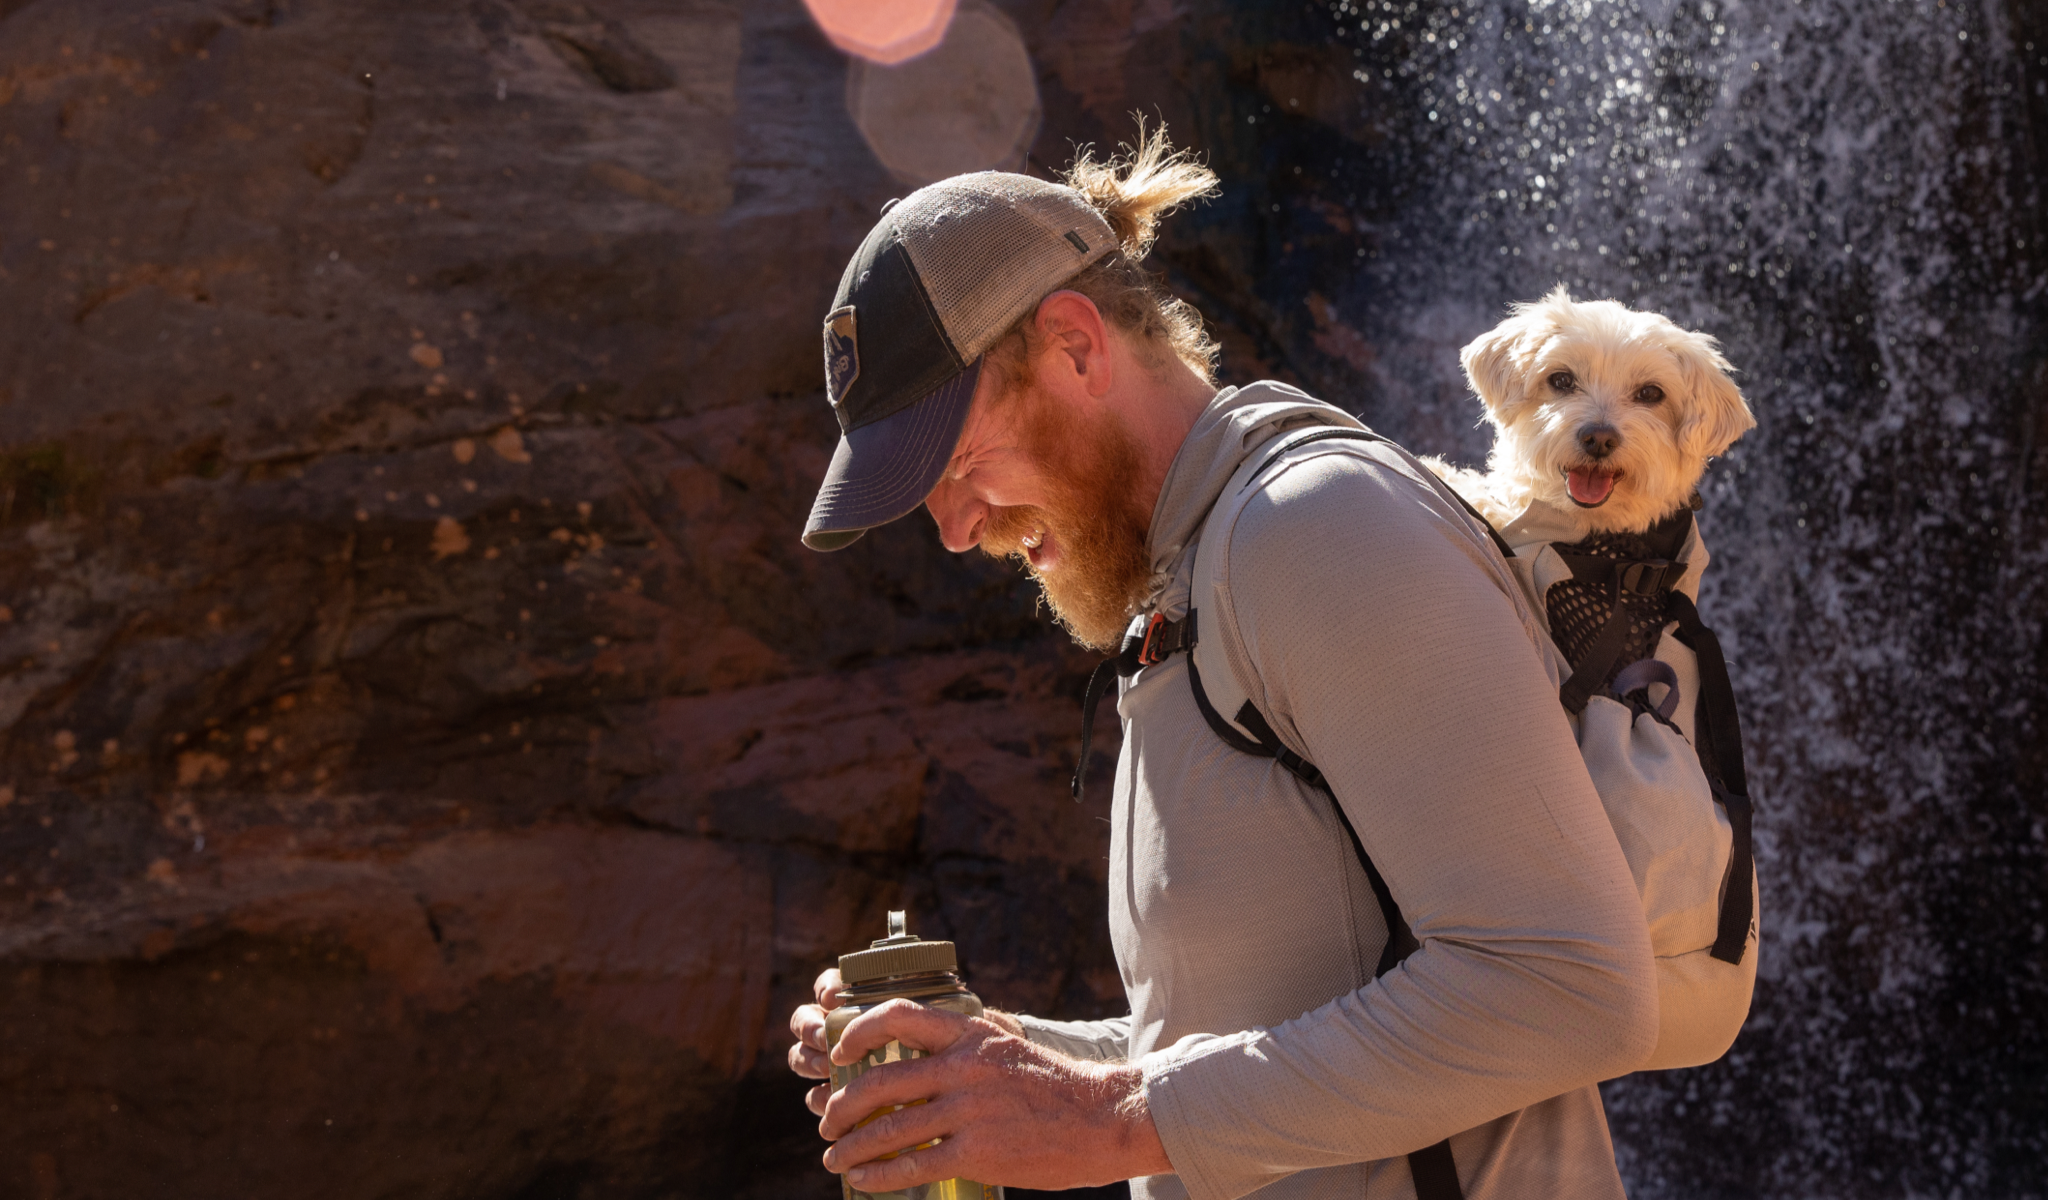 A man enjoys a hike with his dog in an AIR 2 backpack carrier